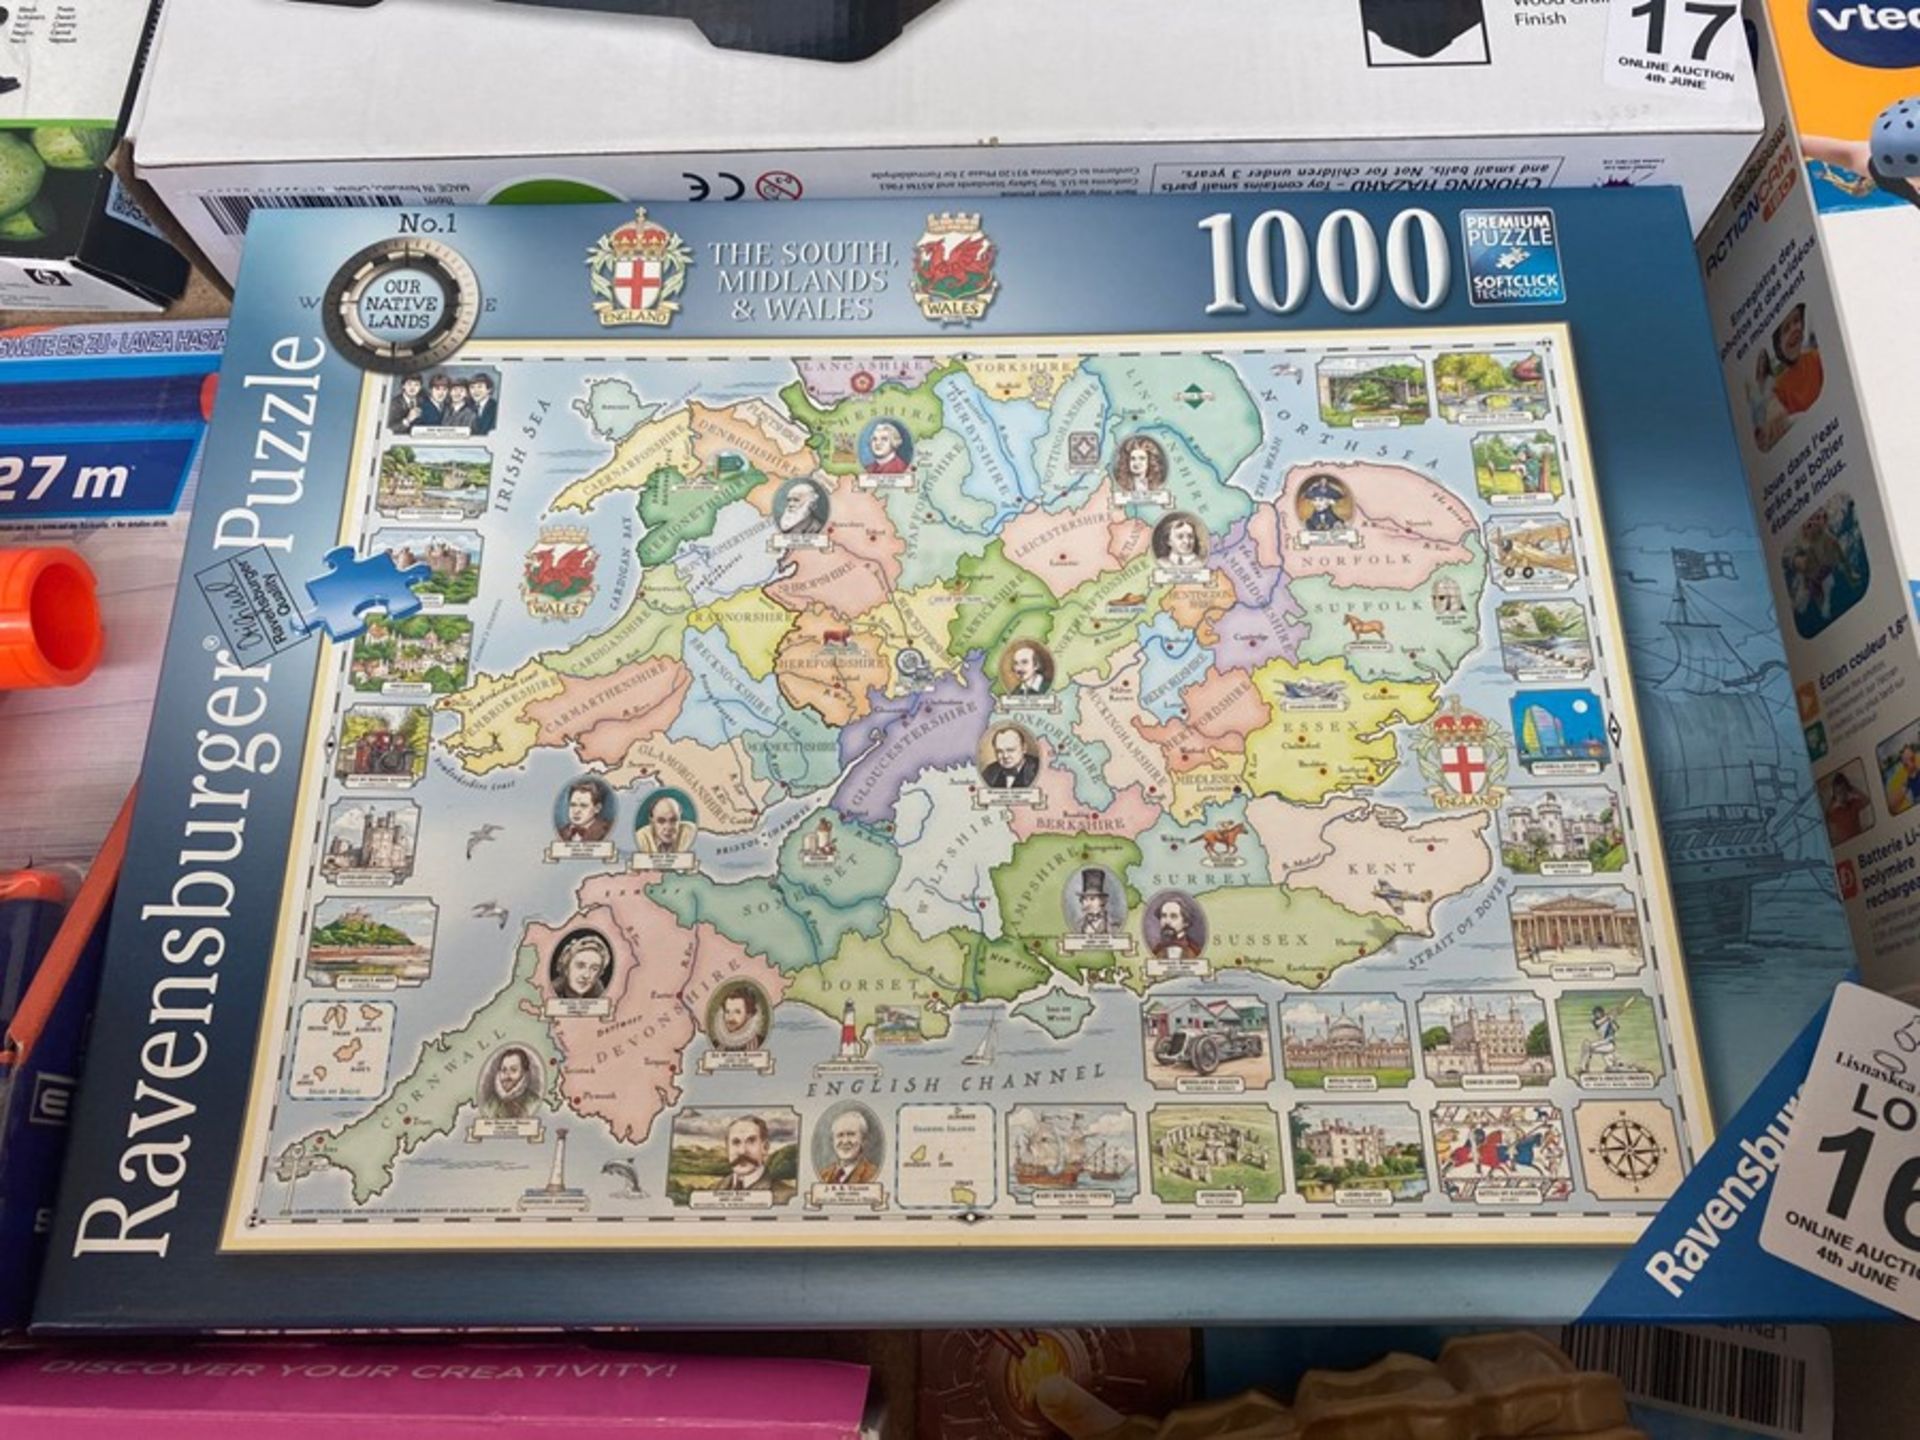 RAVENSBURGER 1000PC “THE SOUTH, MIDLANDS & WALES” PUZZLE